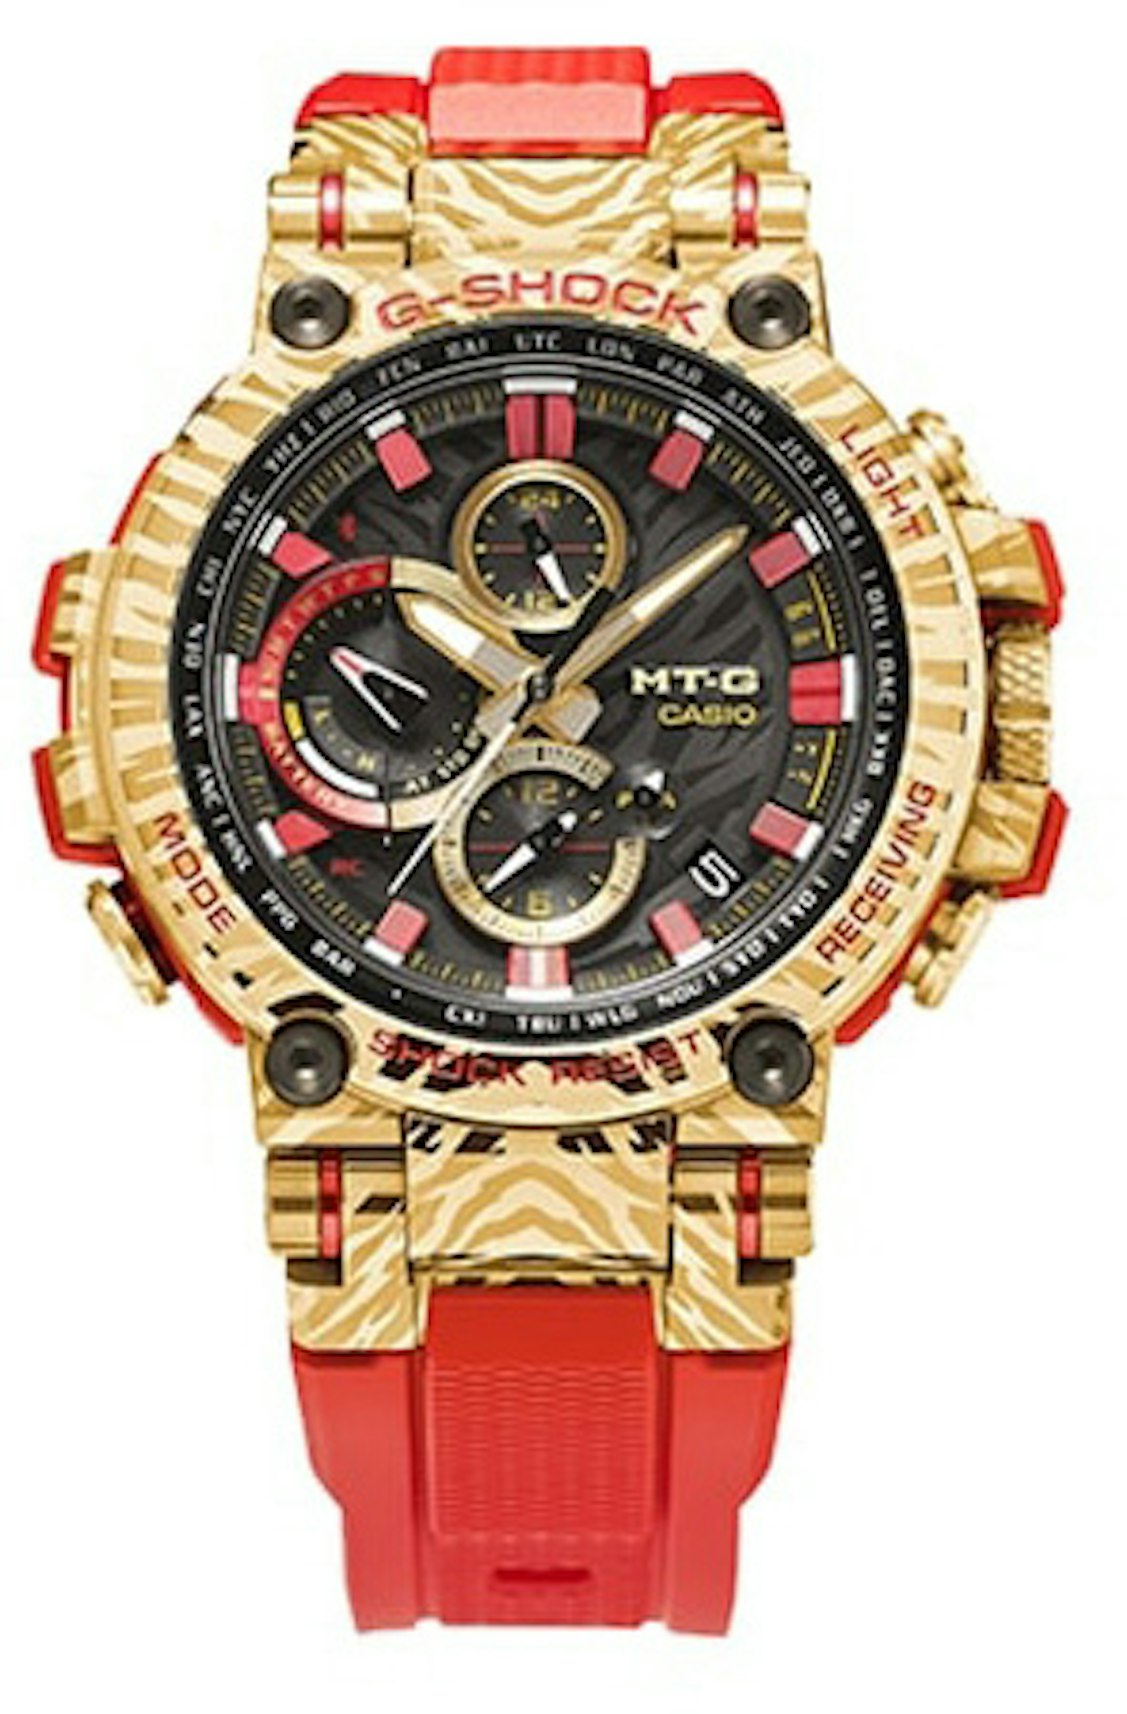 Casio G-Shock Chinese New Year Limited Edition MTG-B1000CX-4AER - 52mm in Stainless Steel -